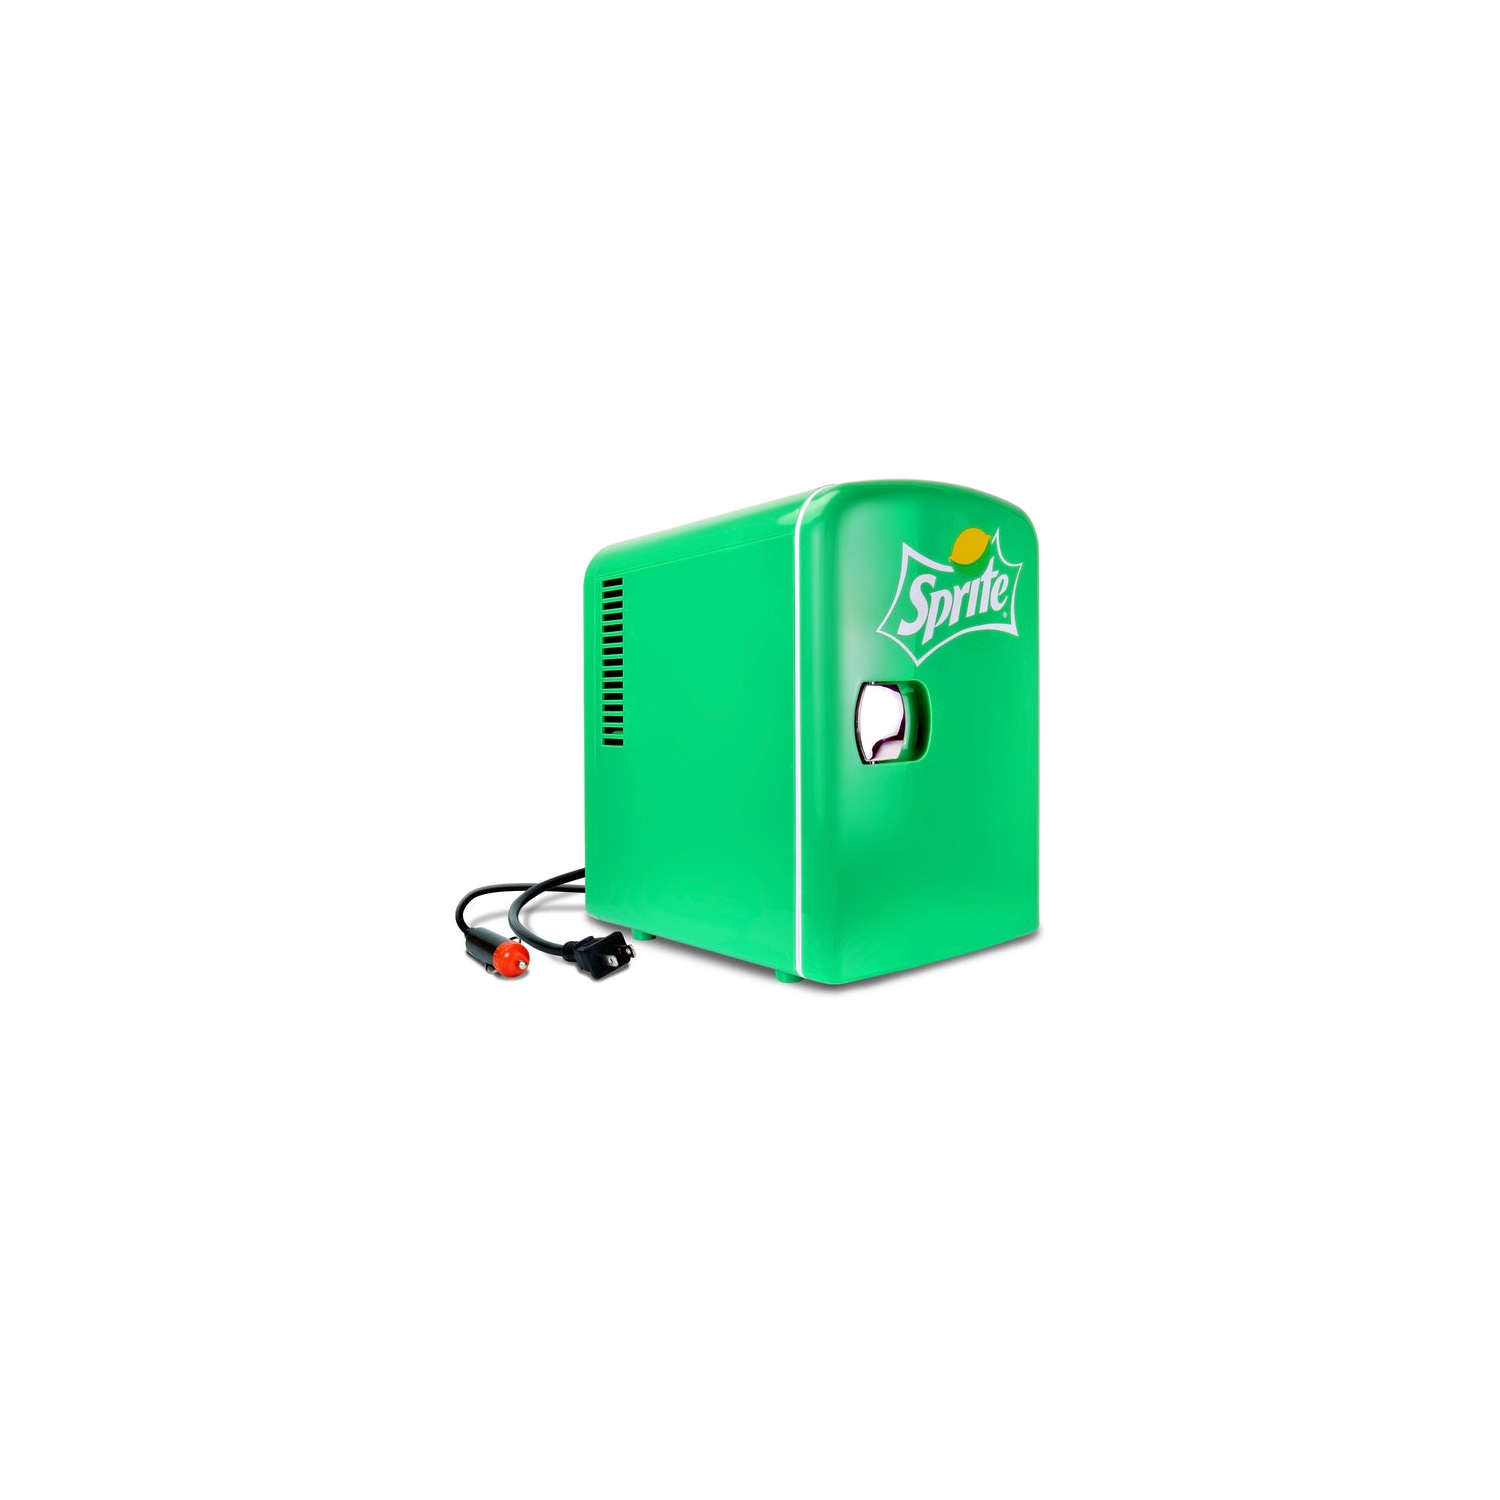 Coca-Cola Sprite 4L Portable Cooler/Warmer, Compact Personal Travel Fridge for Snacks Lunch Drinks Cosmetics, Includes 12V and AC Cords, Green